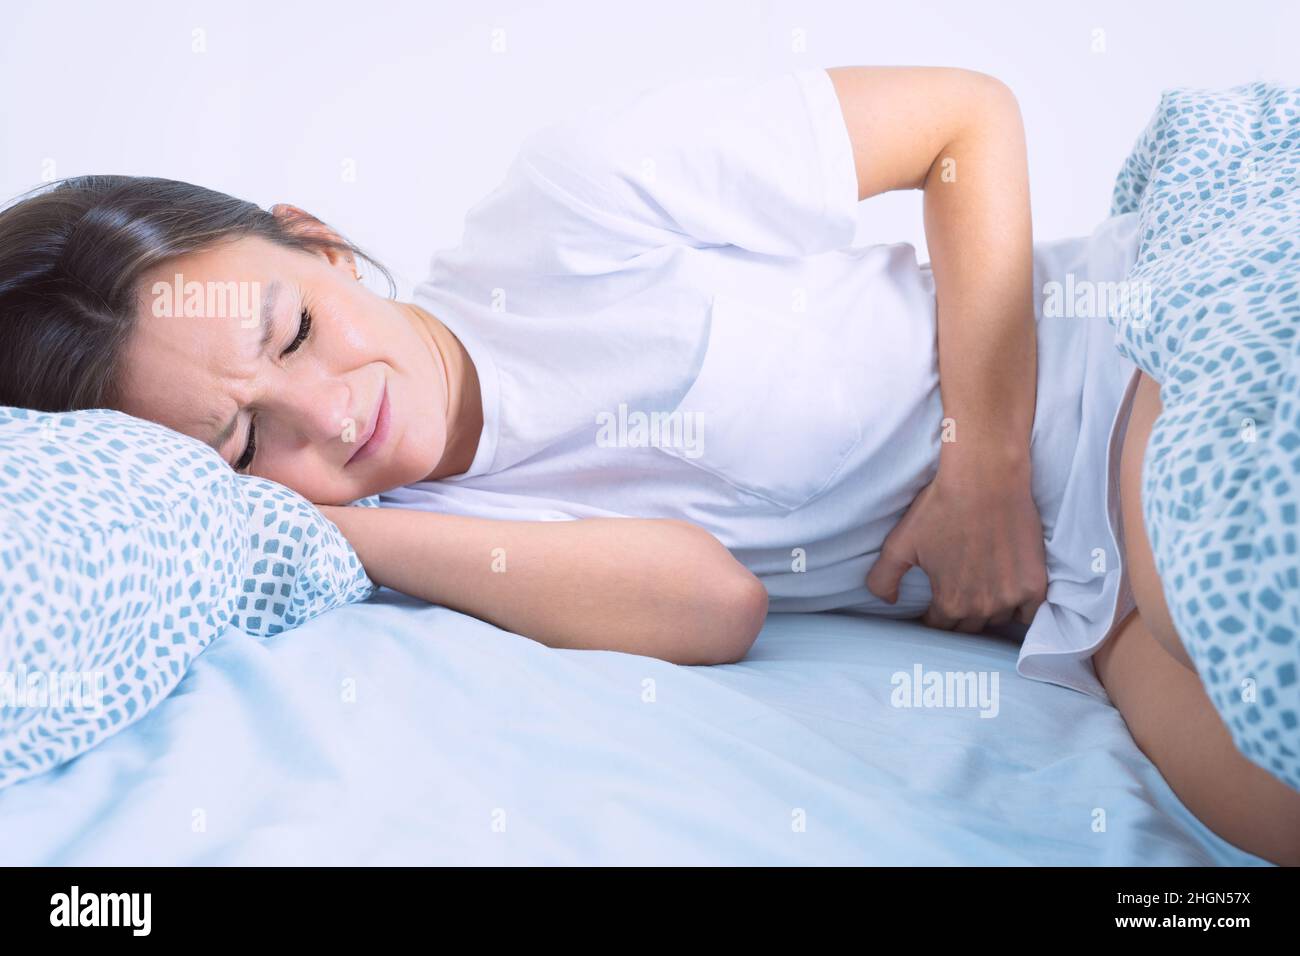 Woman in bed suffering from menstruation pain, stomach ache or abdominal pain. Menstruation period or PMS Stock Photo